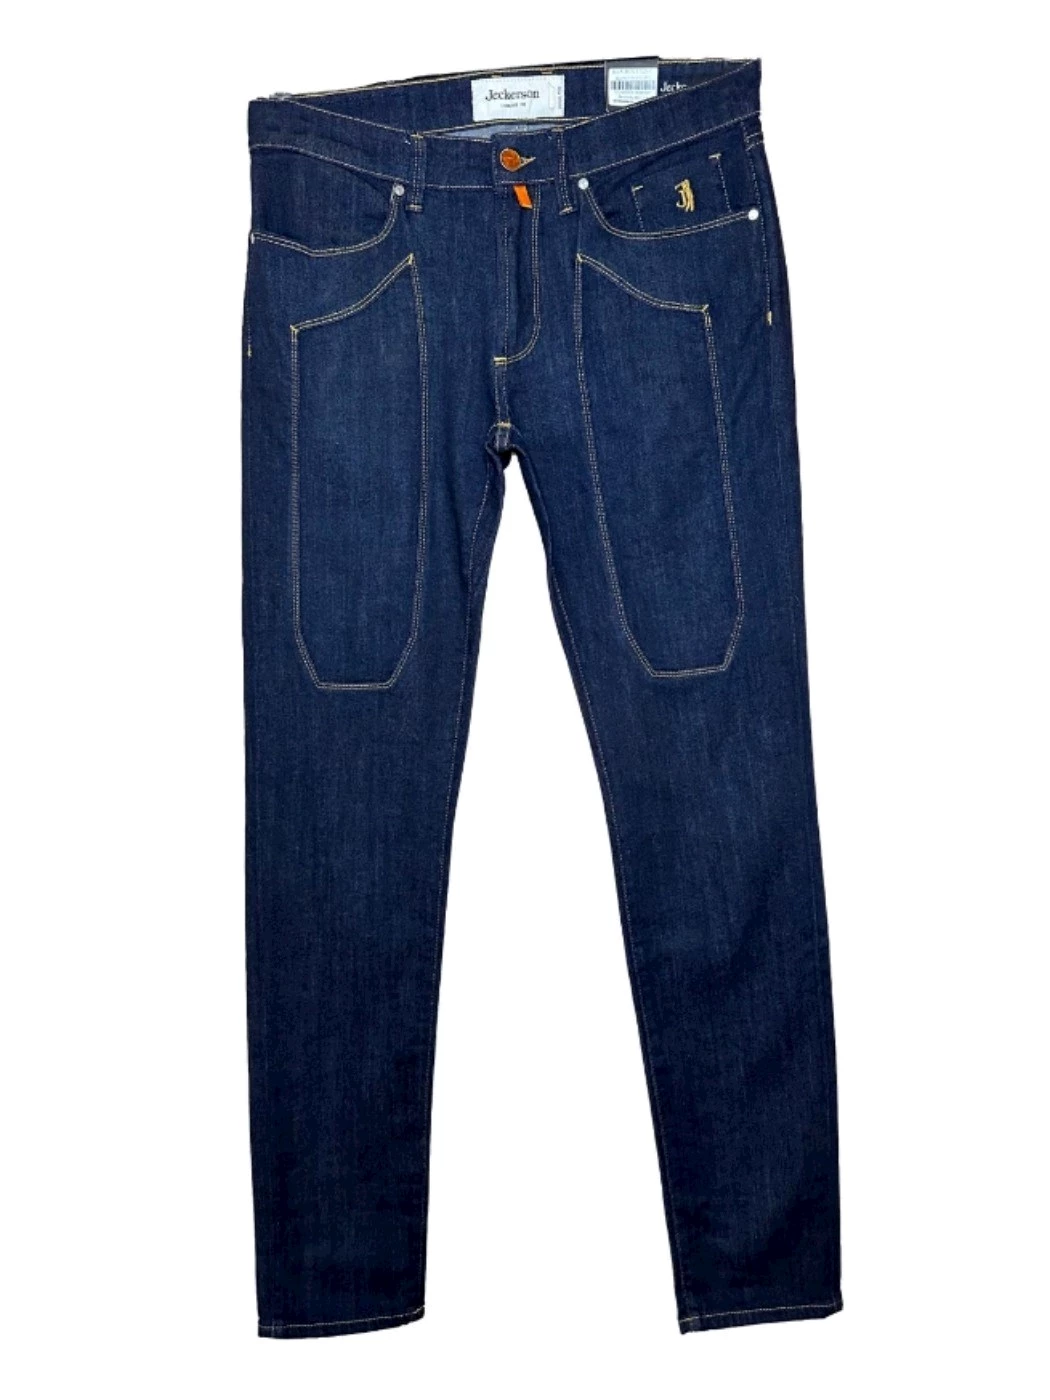 Denim jeans with Jeckerson patch